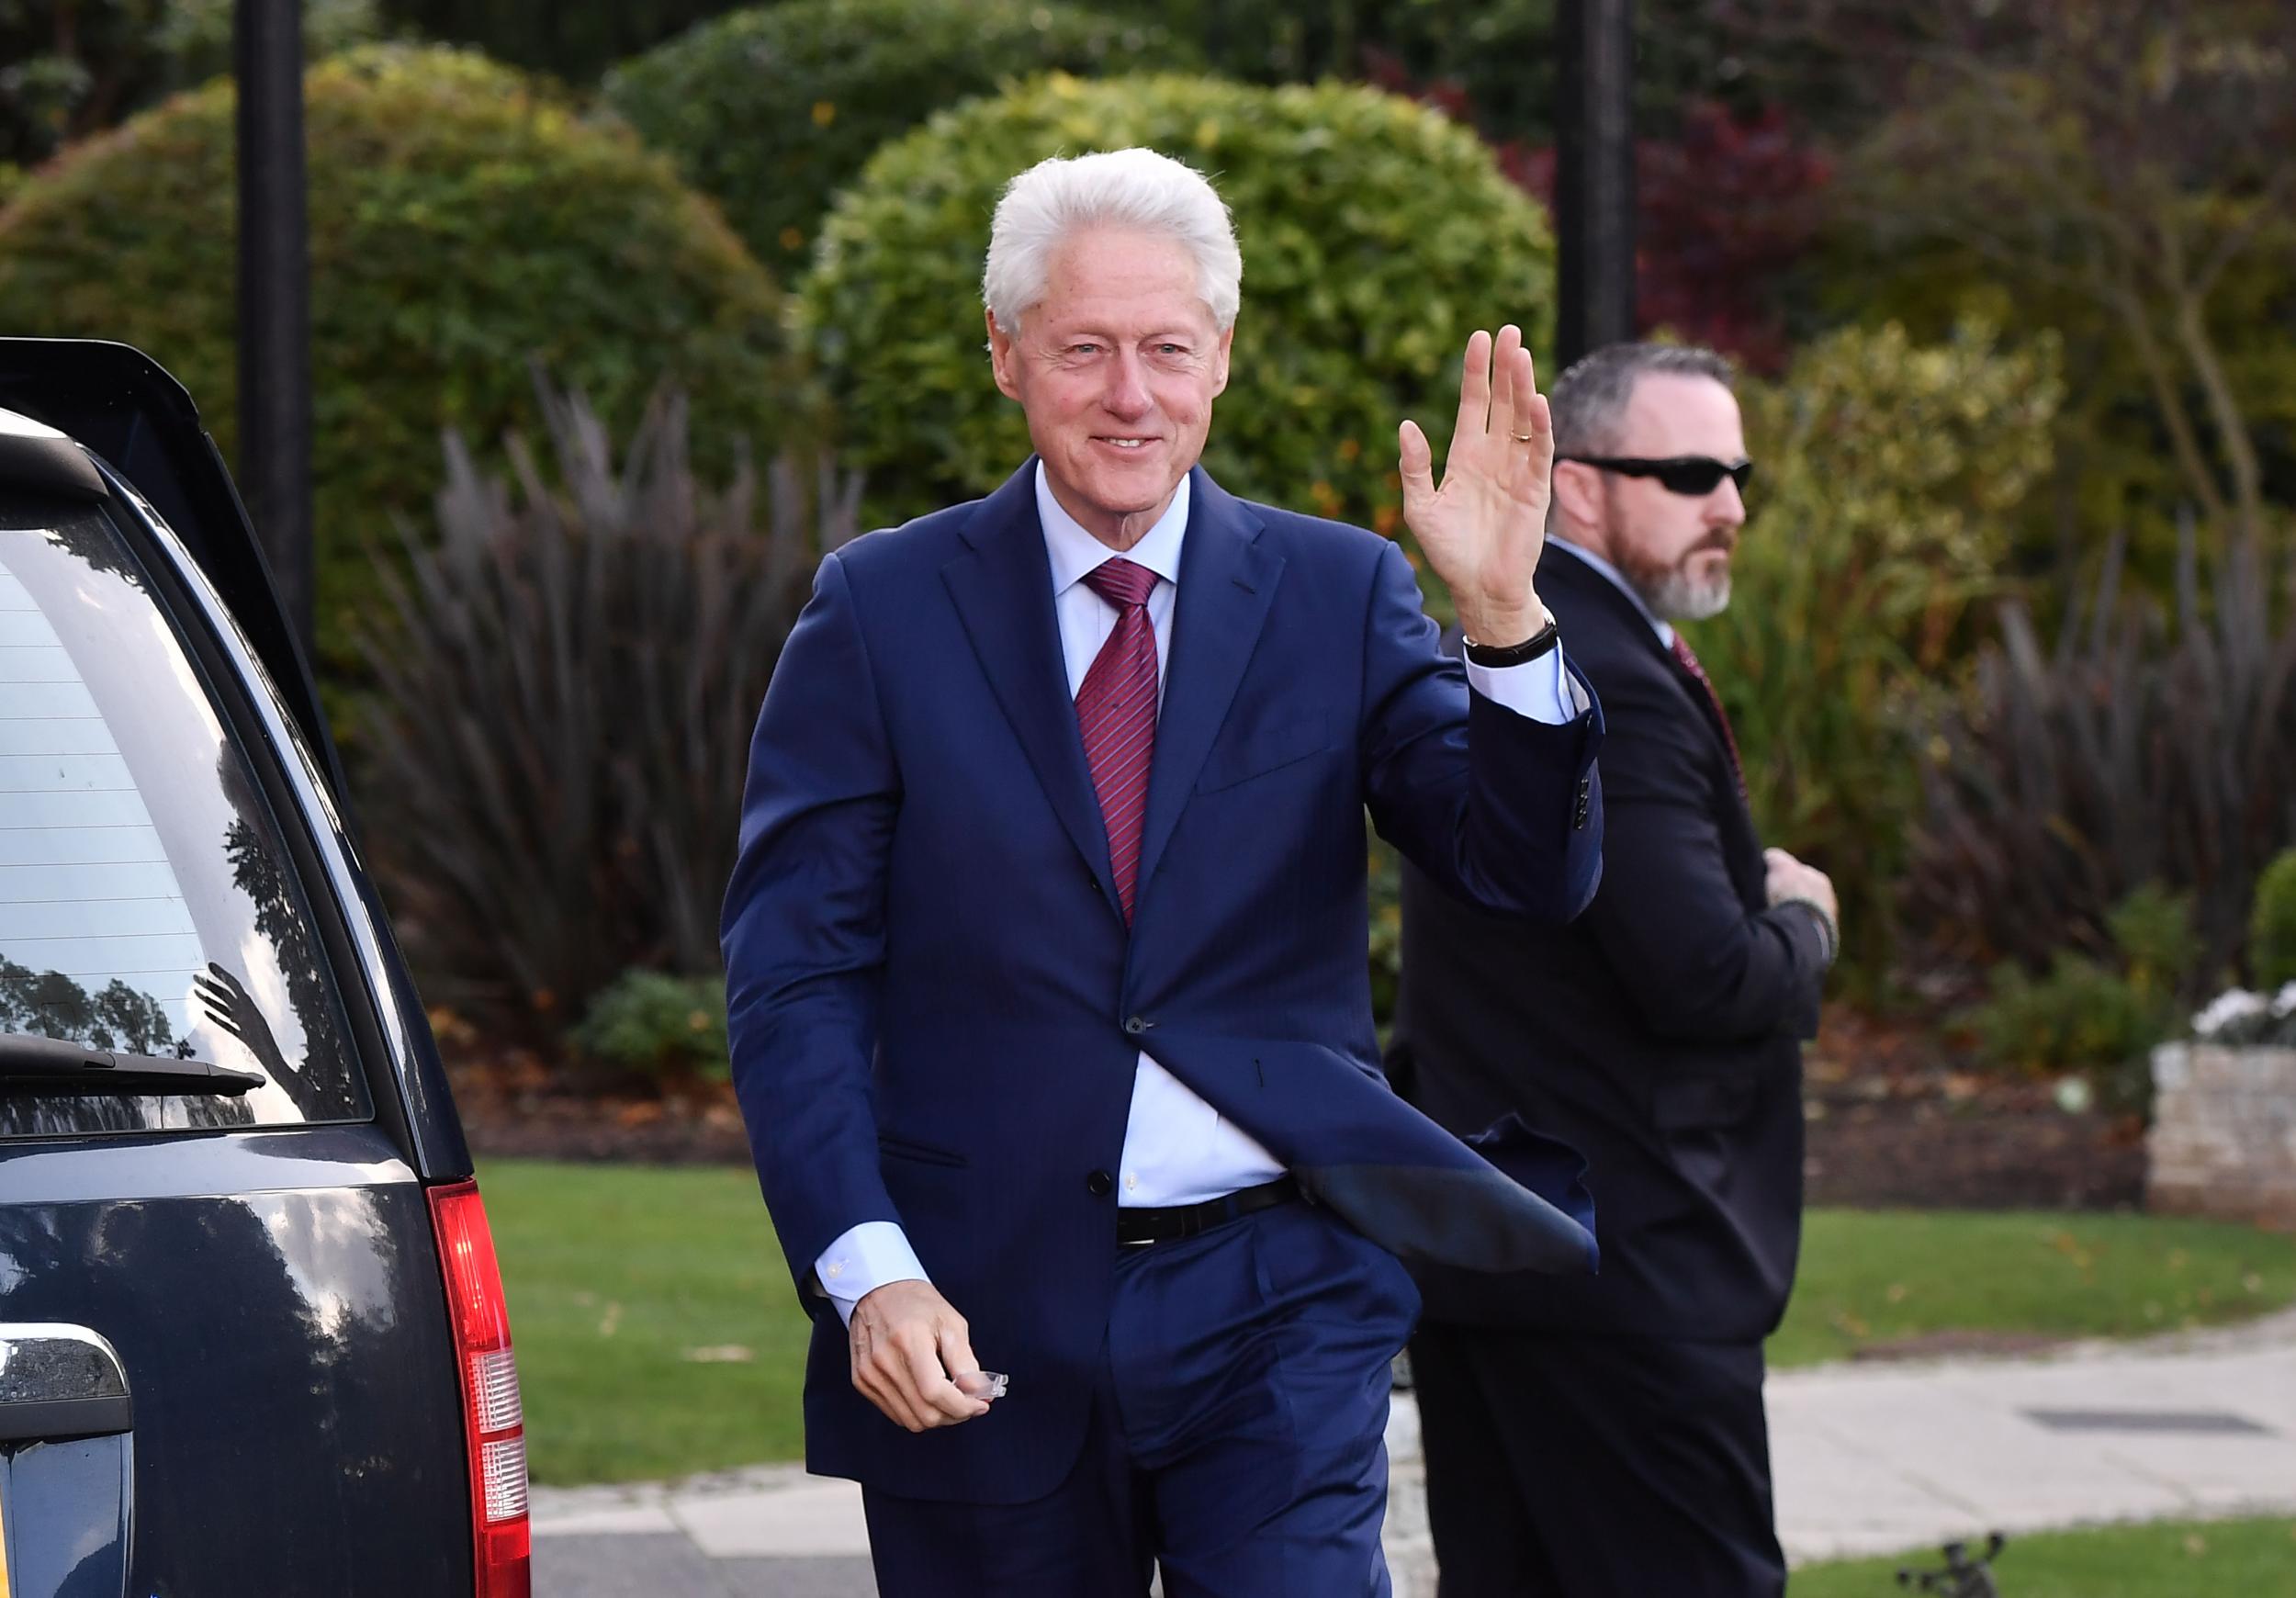 Bill Clinton attends talks at Stormont amid ongoing impasse between Northern Ireland's political parties